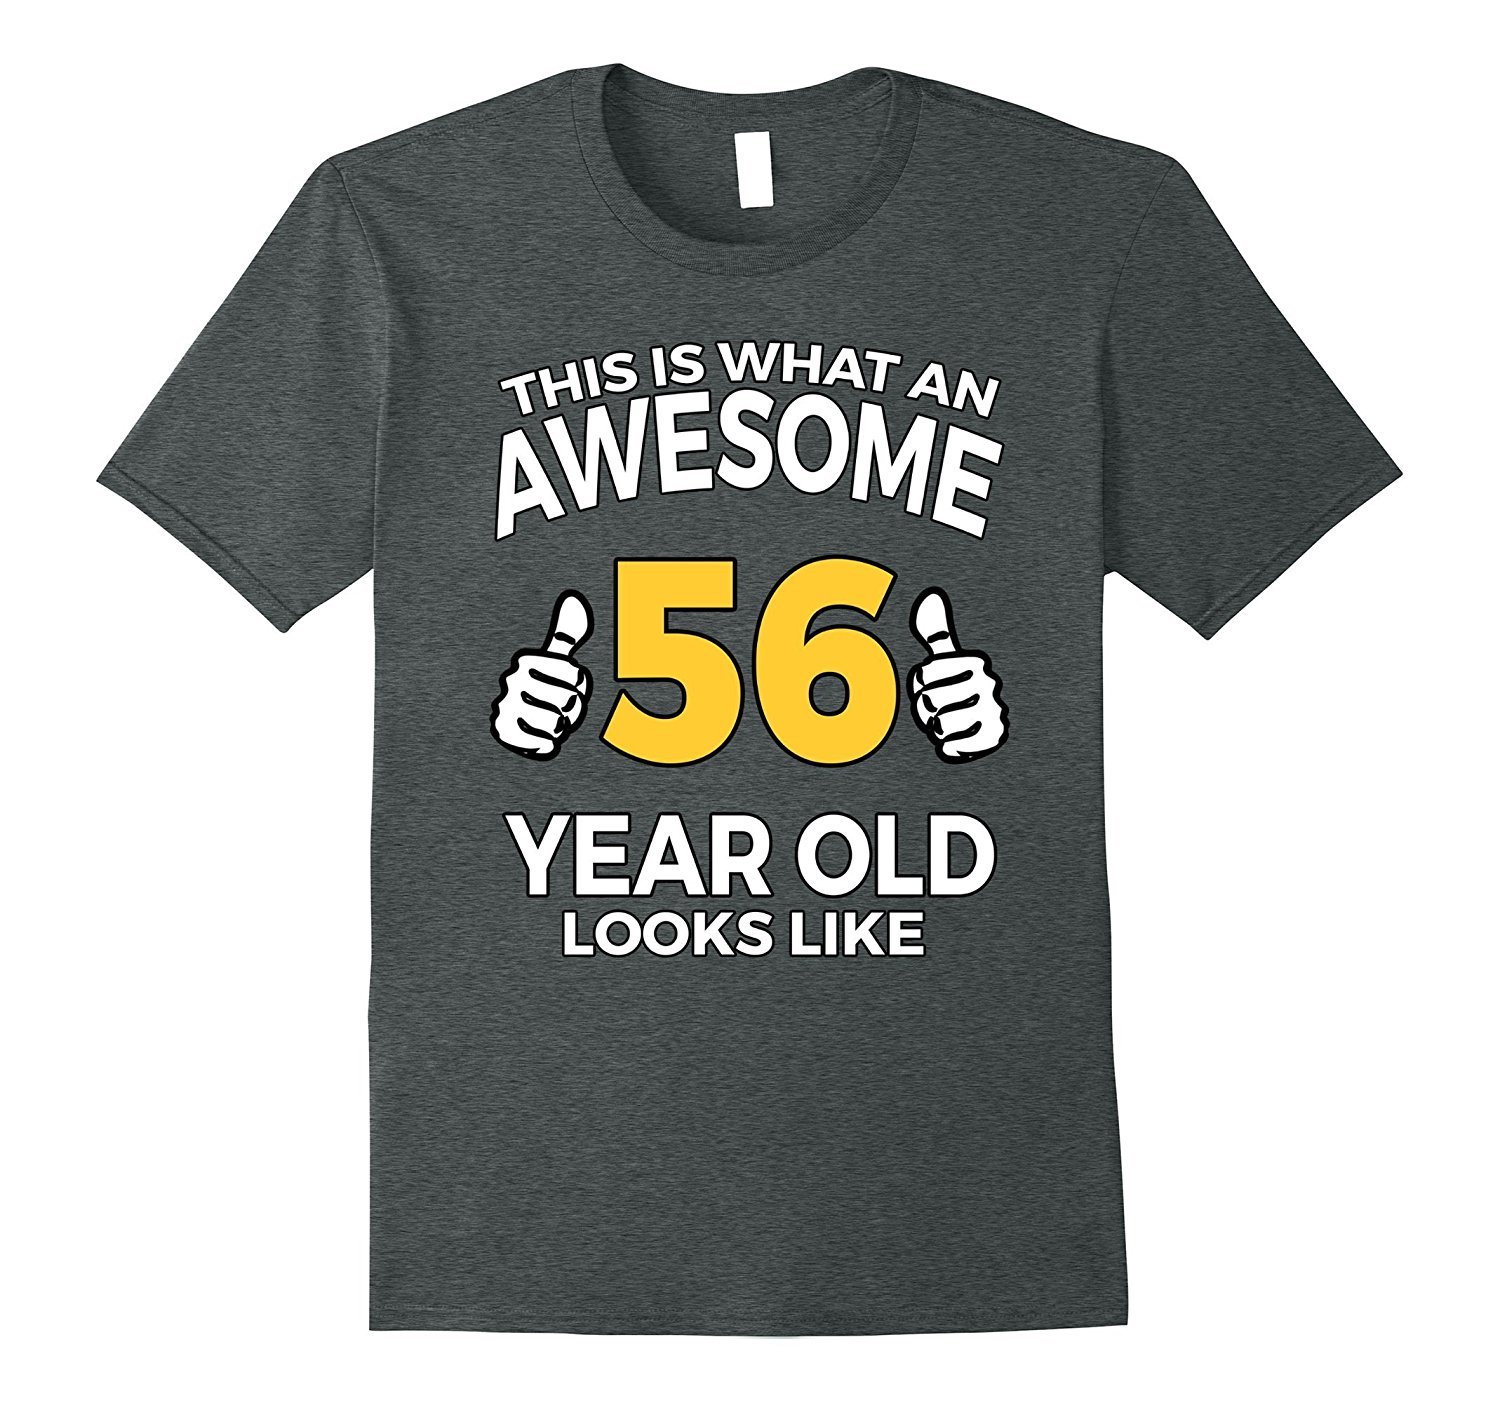 56th Birthday Gift T Shirt for Awesome 56 Year Olds Men - T-Shirts ...